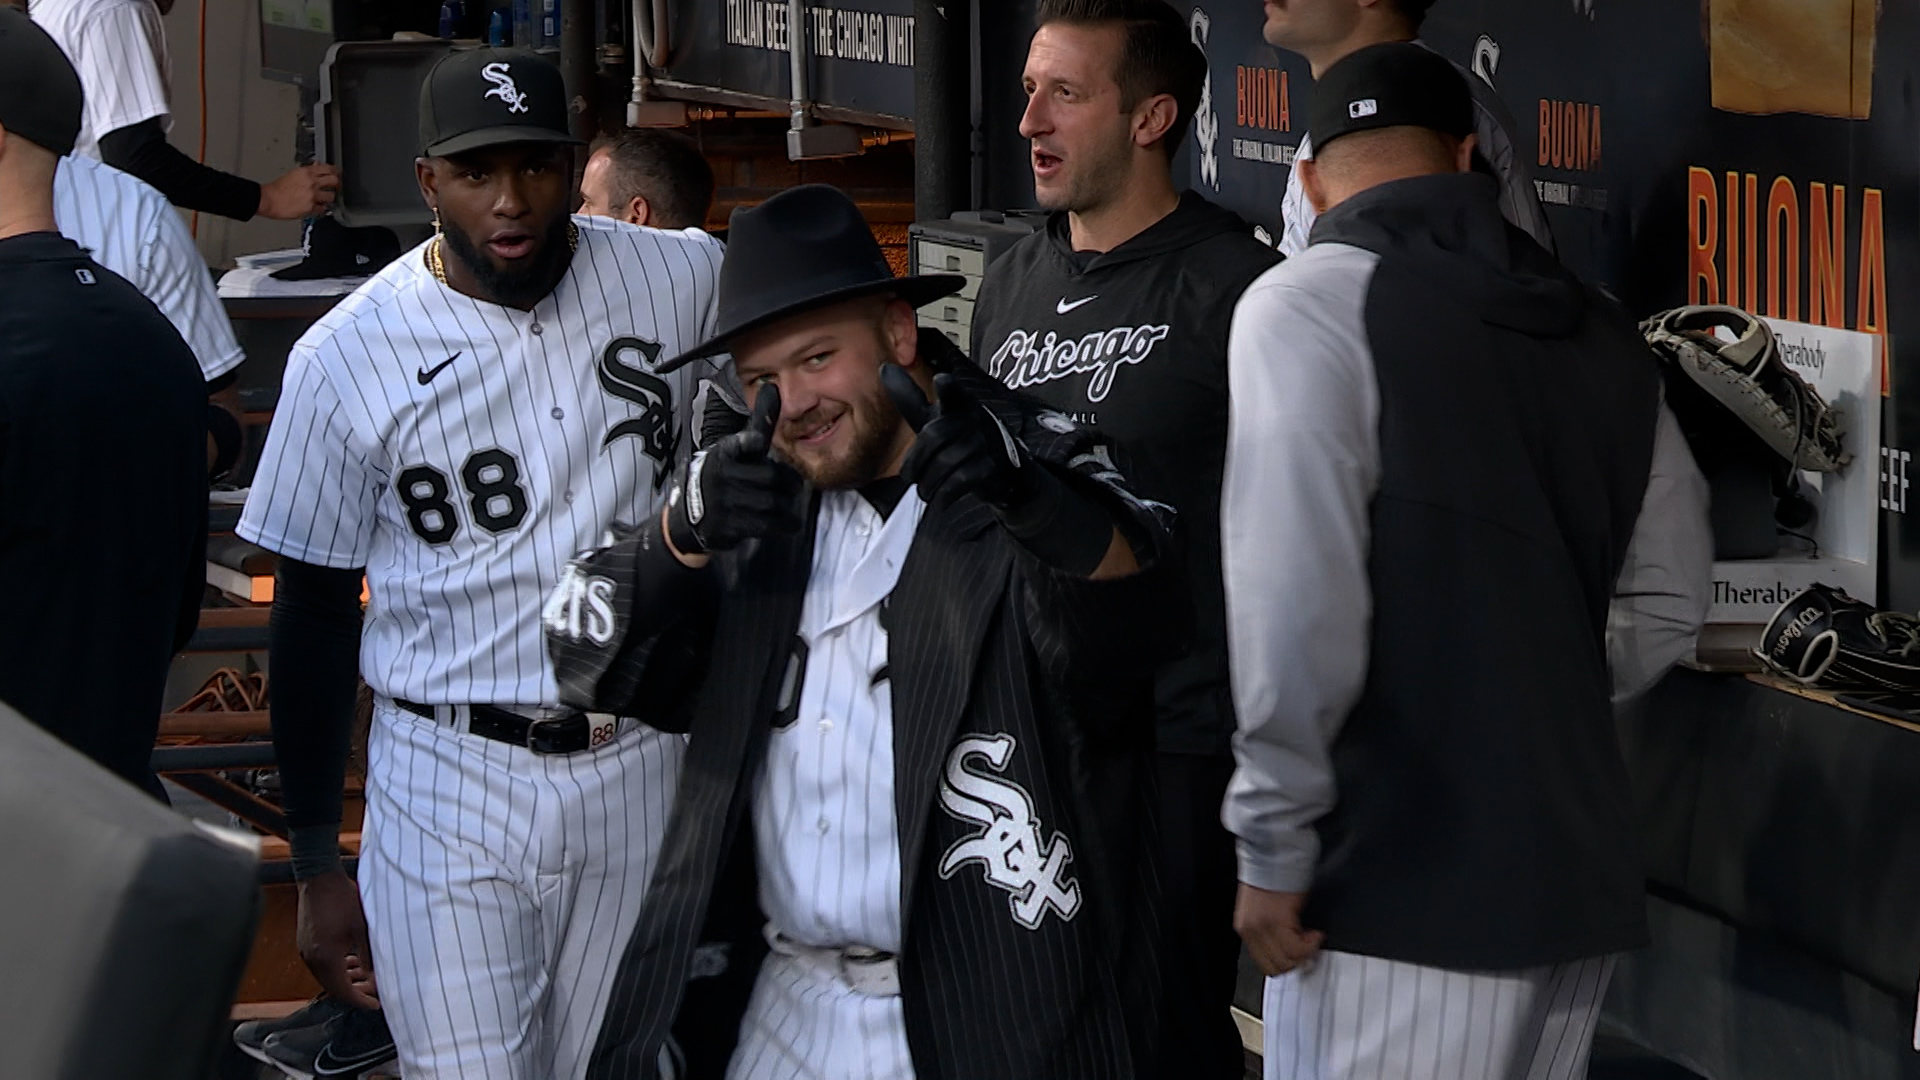 Céspedes Family BBQ on X: The White Sox home run celebration hat makes  everyone look like an orthodox jew on their way home from shul 10/10 all it  needs is tallit  /